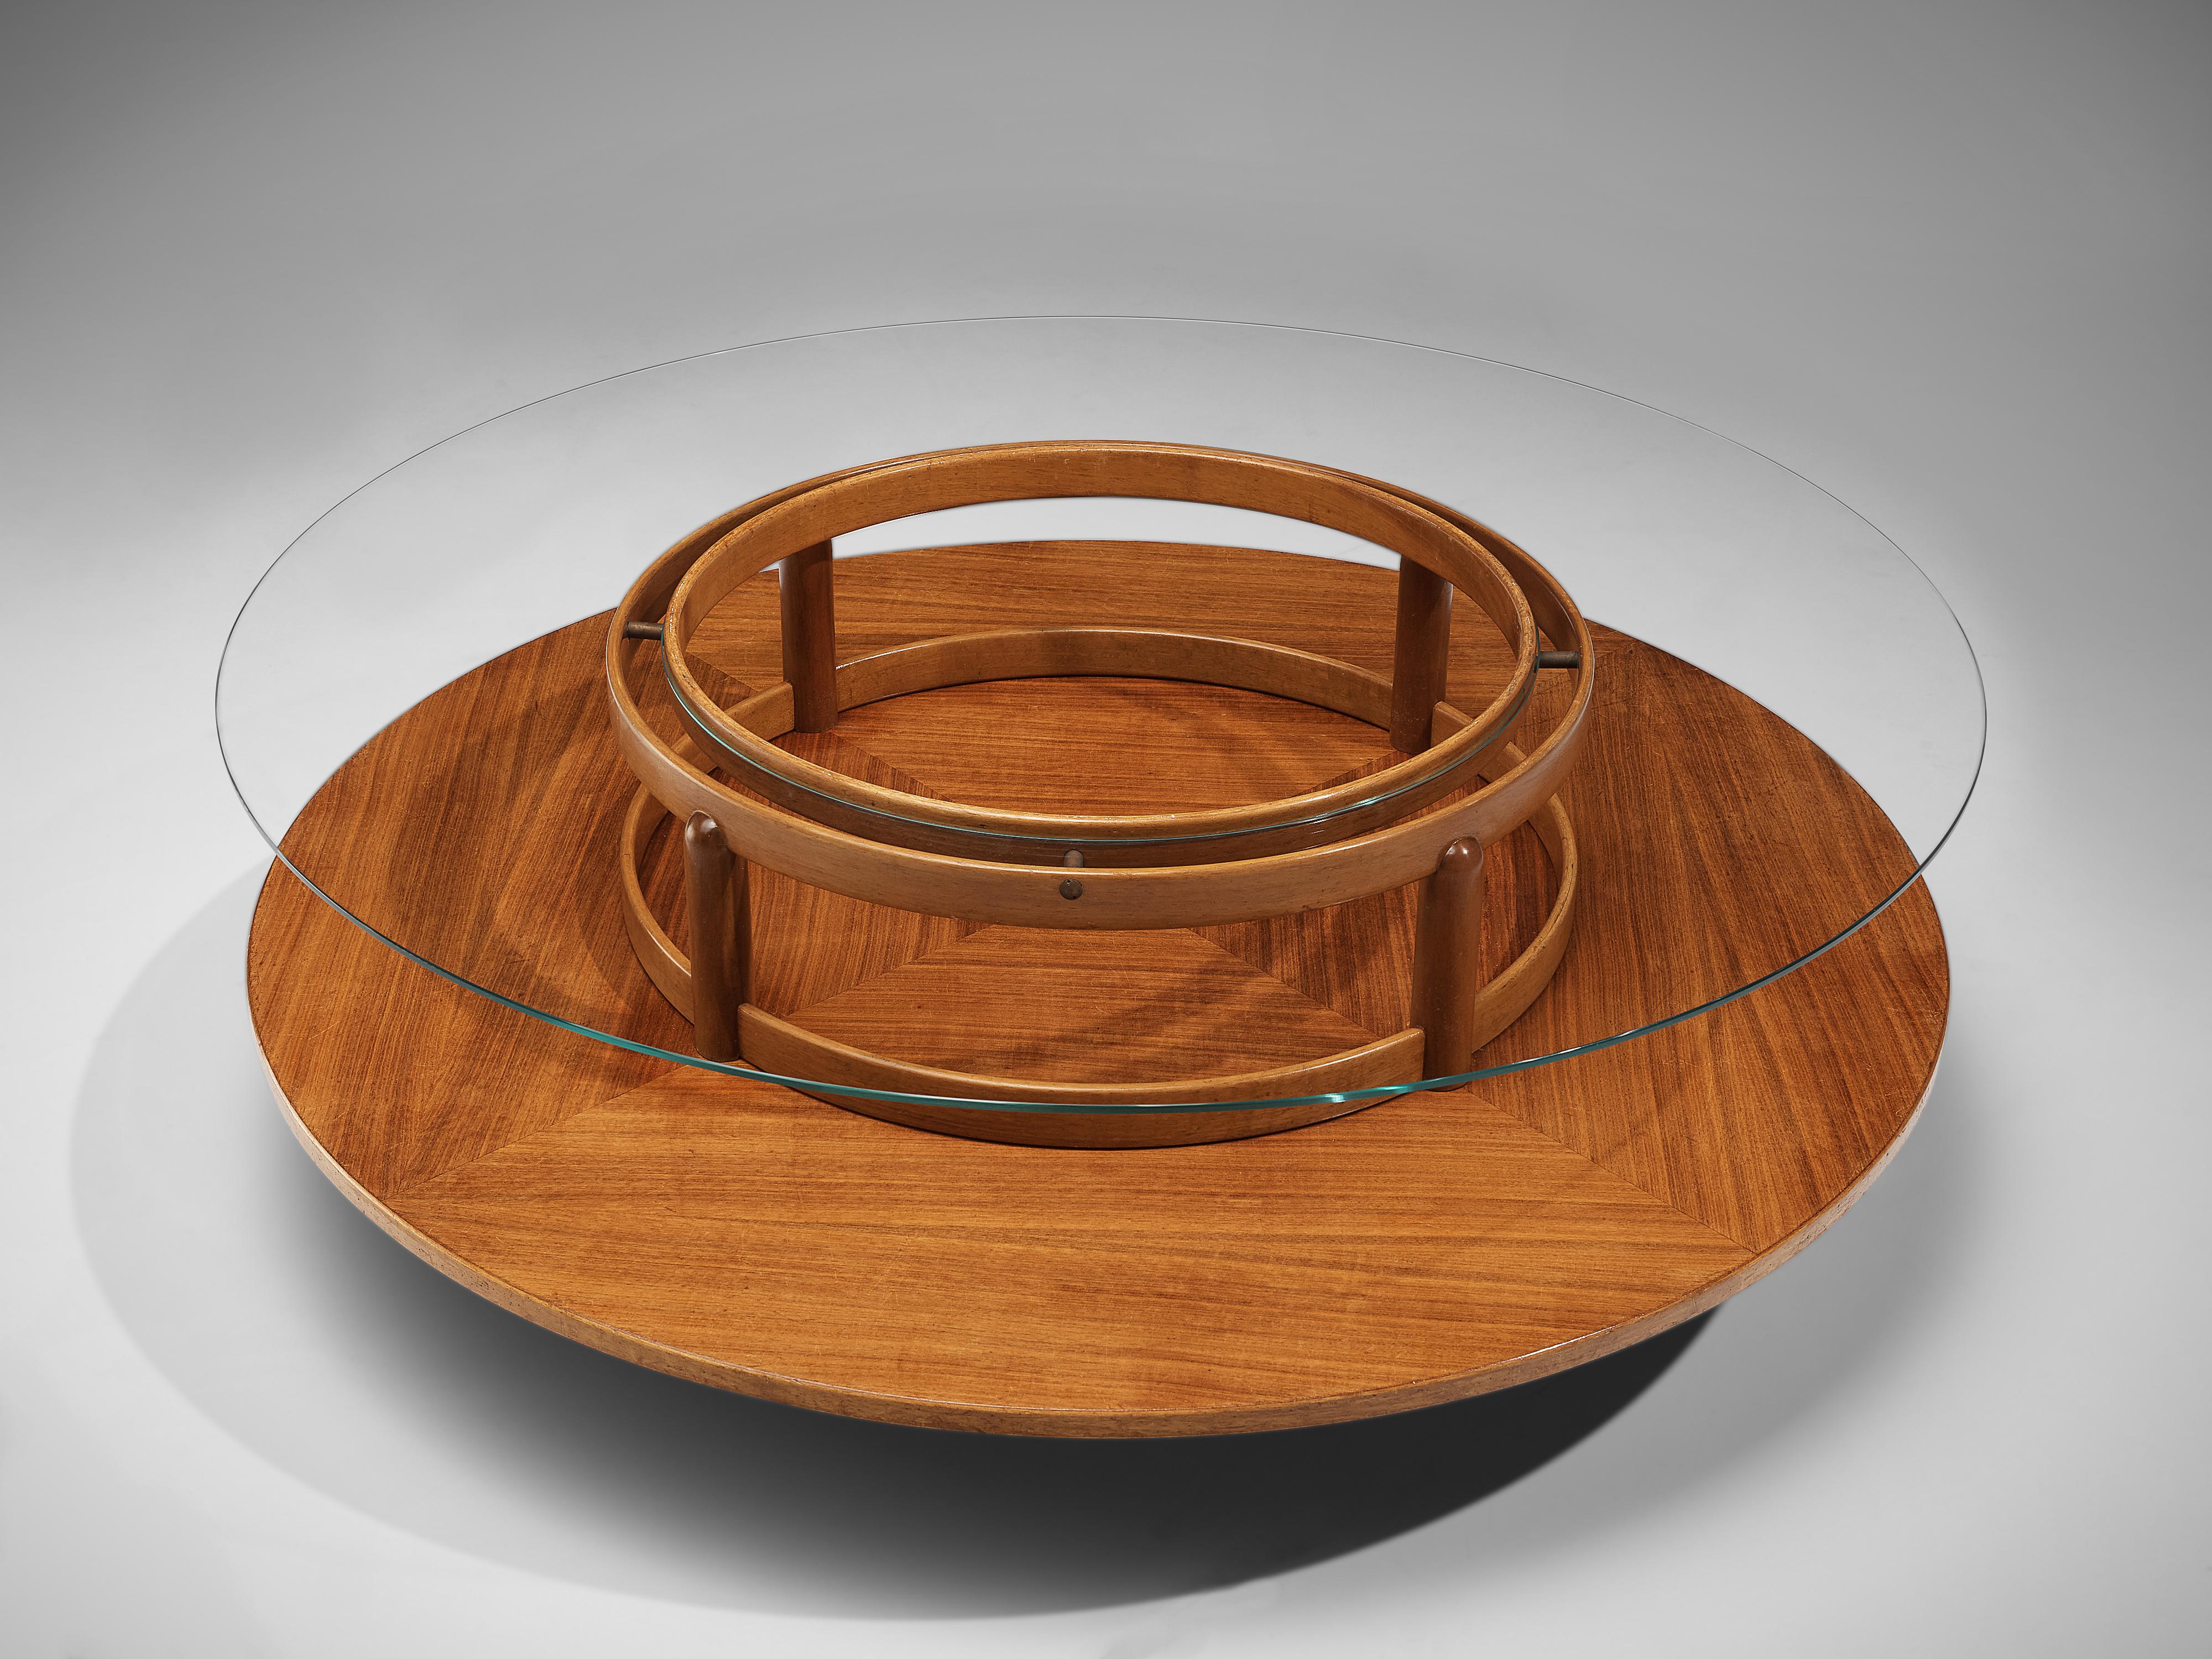 Gianfranco Frattini for Cassina, round coffee table, walnut, glass, Italy, 1950s

This rare coffee table is executed within a well-proportioned construction based on a geometric layout. The circle is repetitive in every element, which contributes to